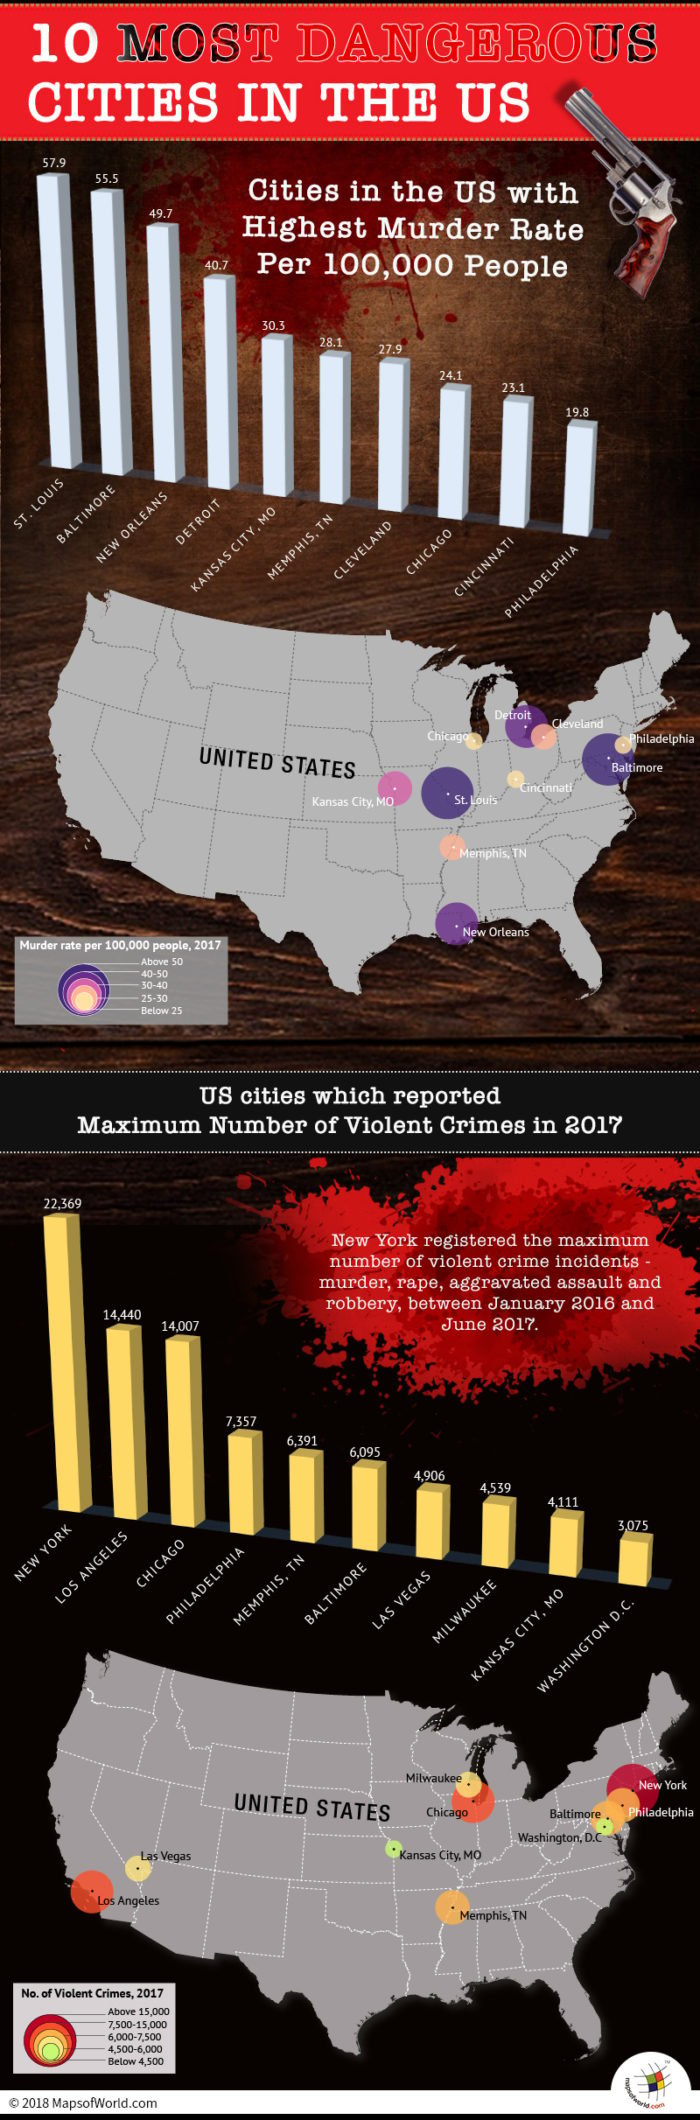 What are Ten Most Dangerous Cities in the US? Answers